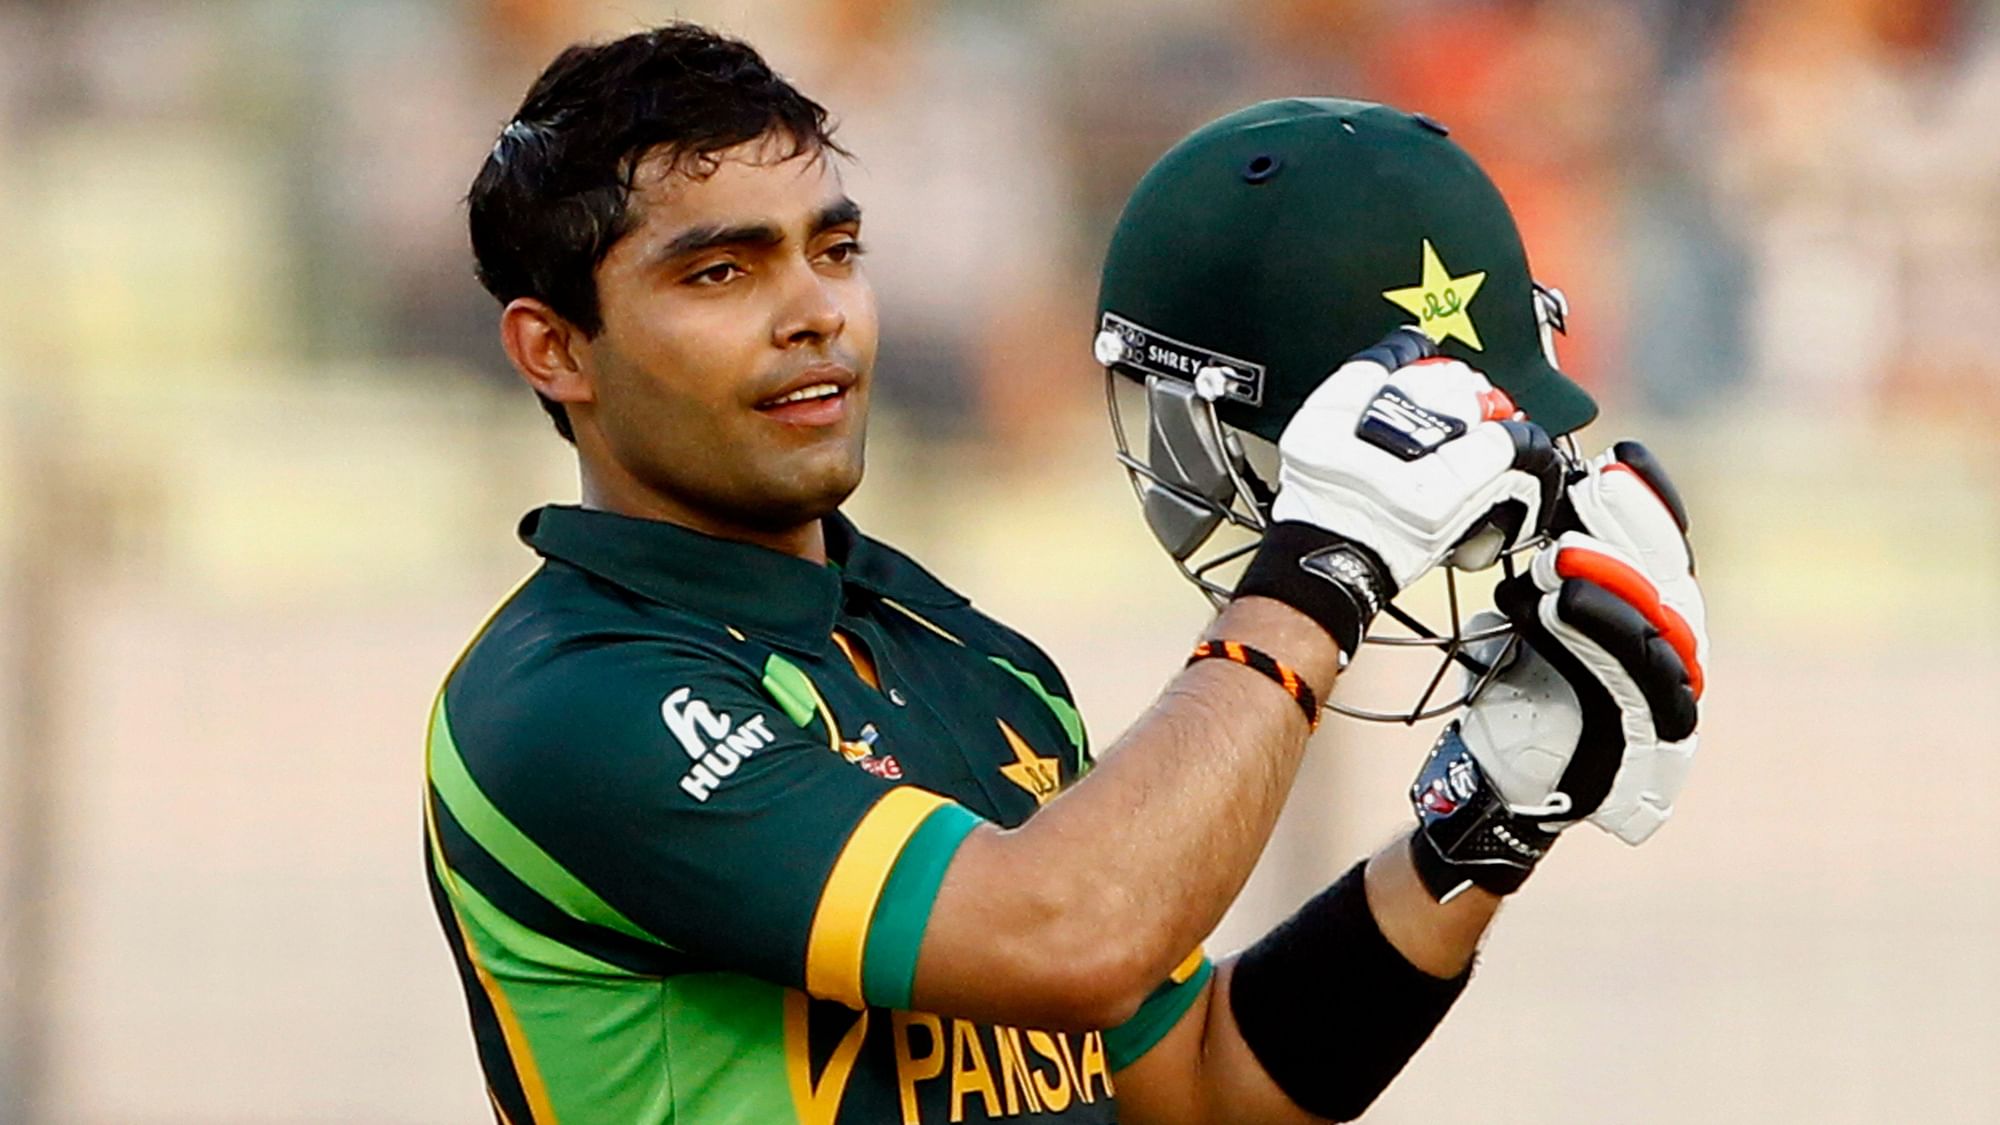 Former PCB chairman Najam Sethi has revealed that Umar Akmal suffered from epileptic fits in the past and refused to take treatment.